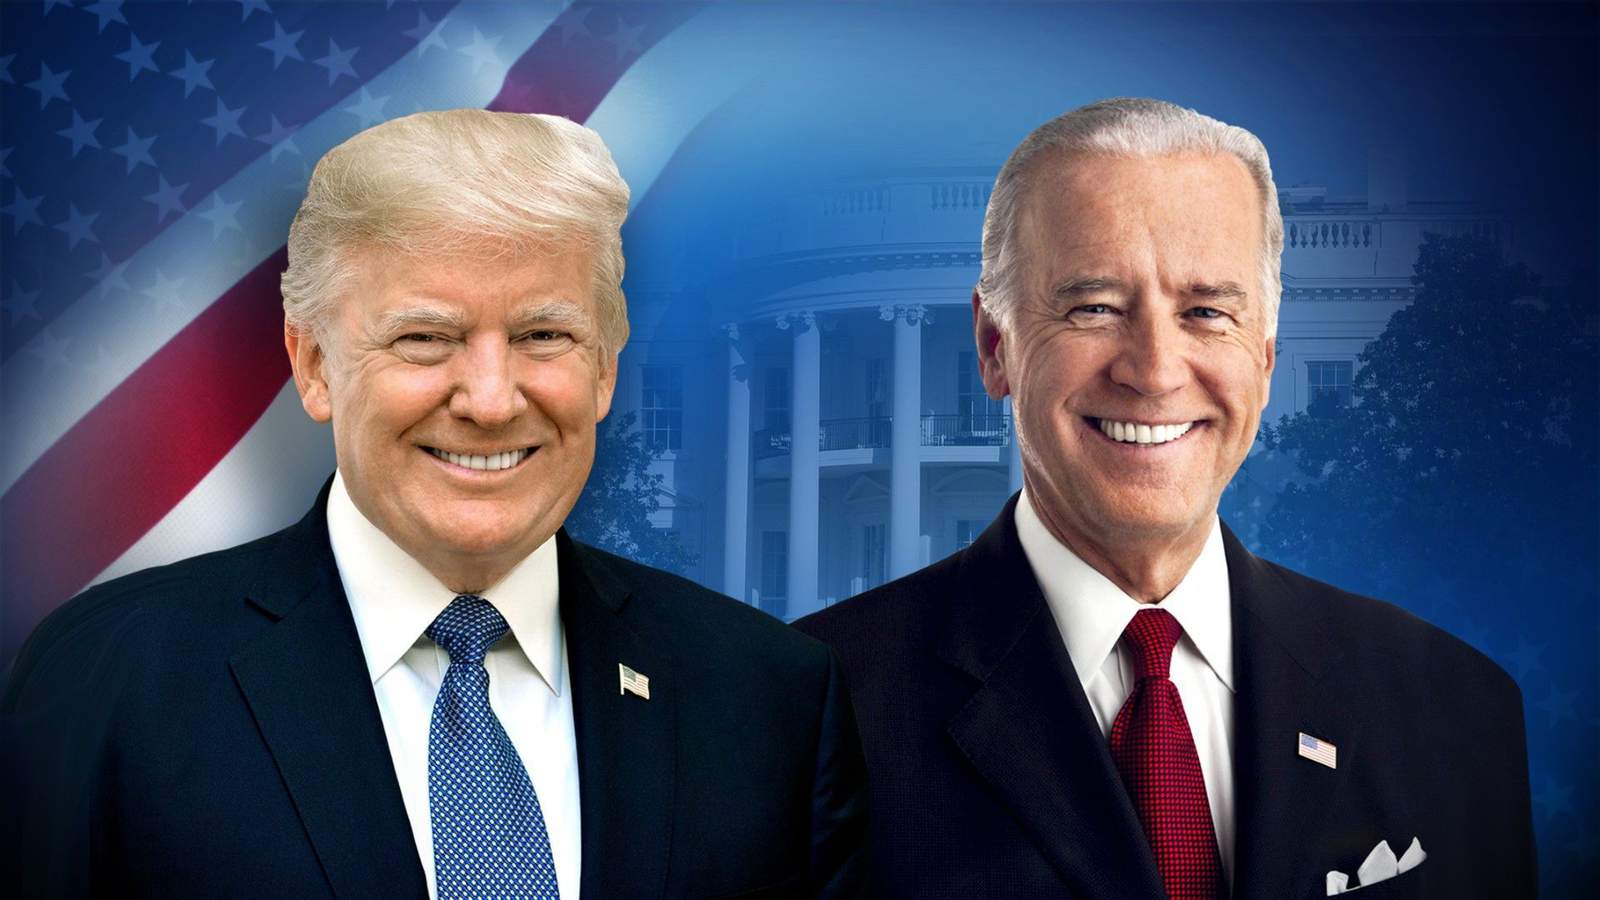 Trump vs. Biden: Here are the final projections in the presidential race